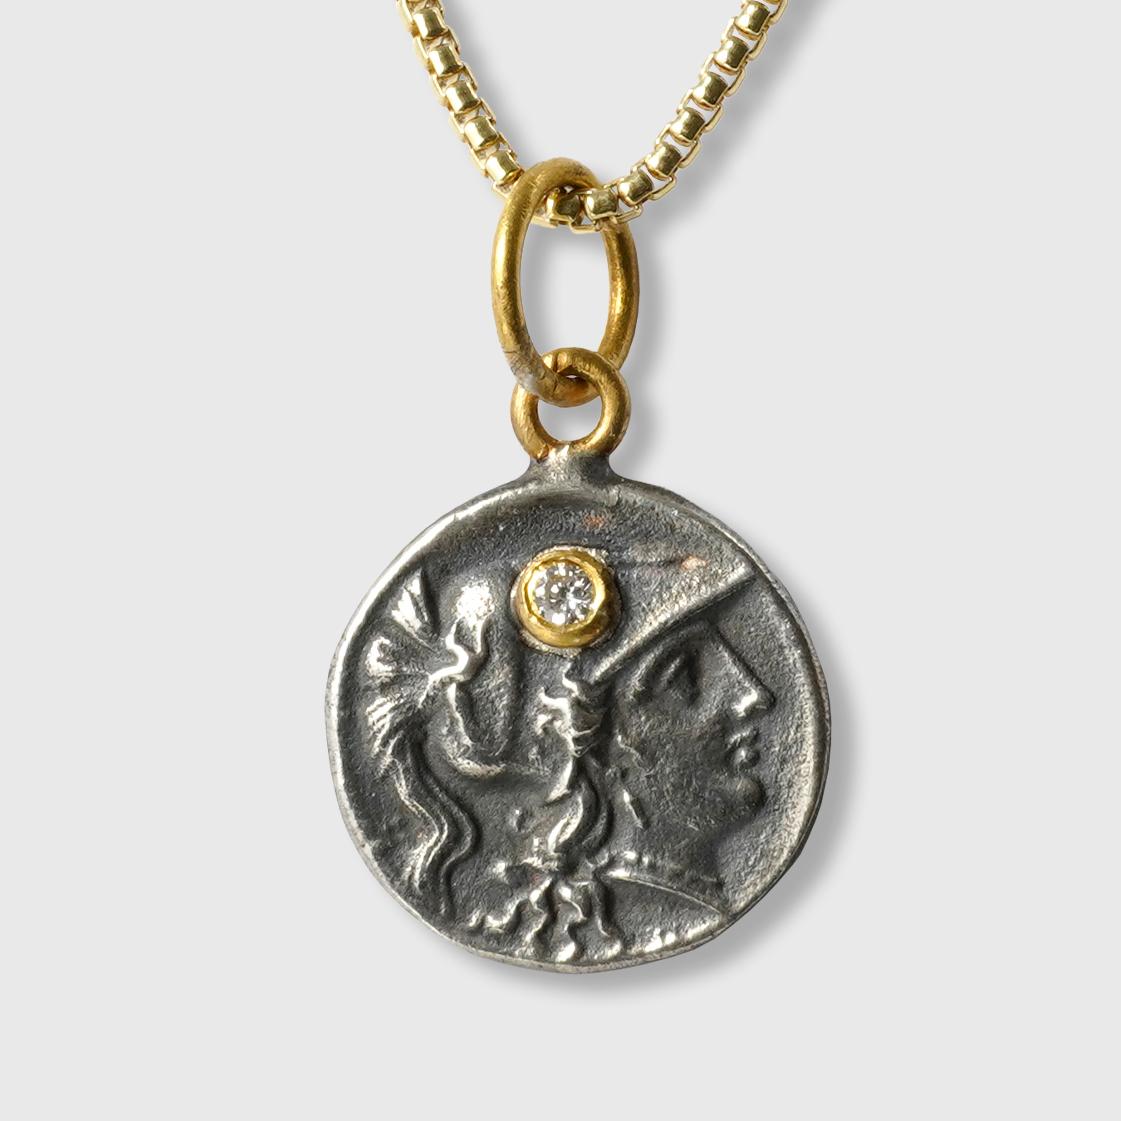 Ancient Athena Coin (Replica) Tetradrachm Charm Pendant, 24kt Gold, Silver & 0.01ct Diamond.

THE STORY: 
Athena was one of the twelve chief Olympian deities and the goddess associated with wisdom, craft, and warfare. In wars—where she was most